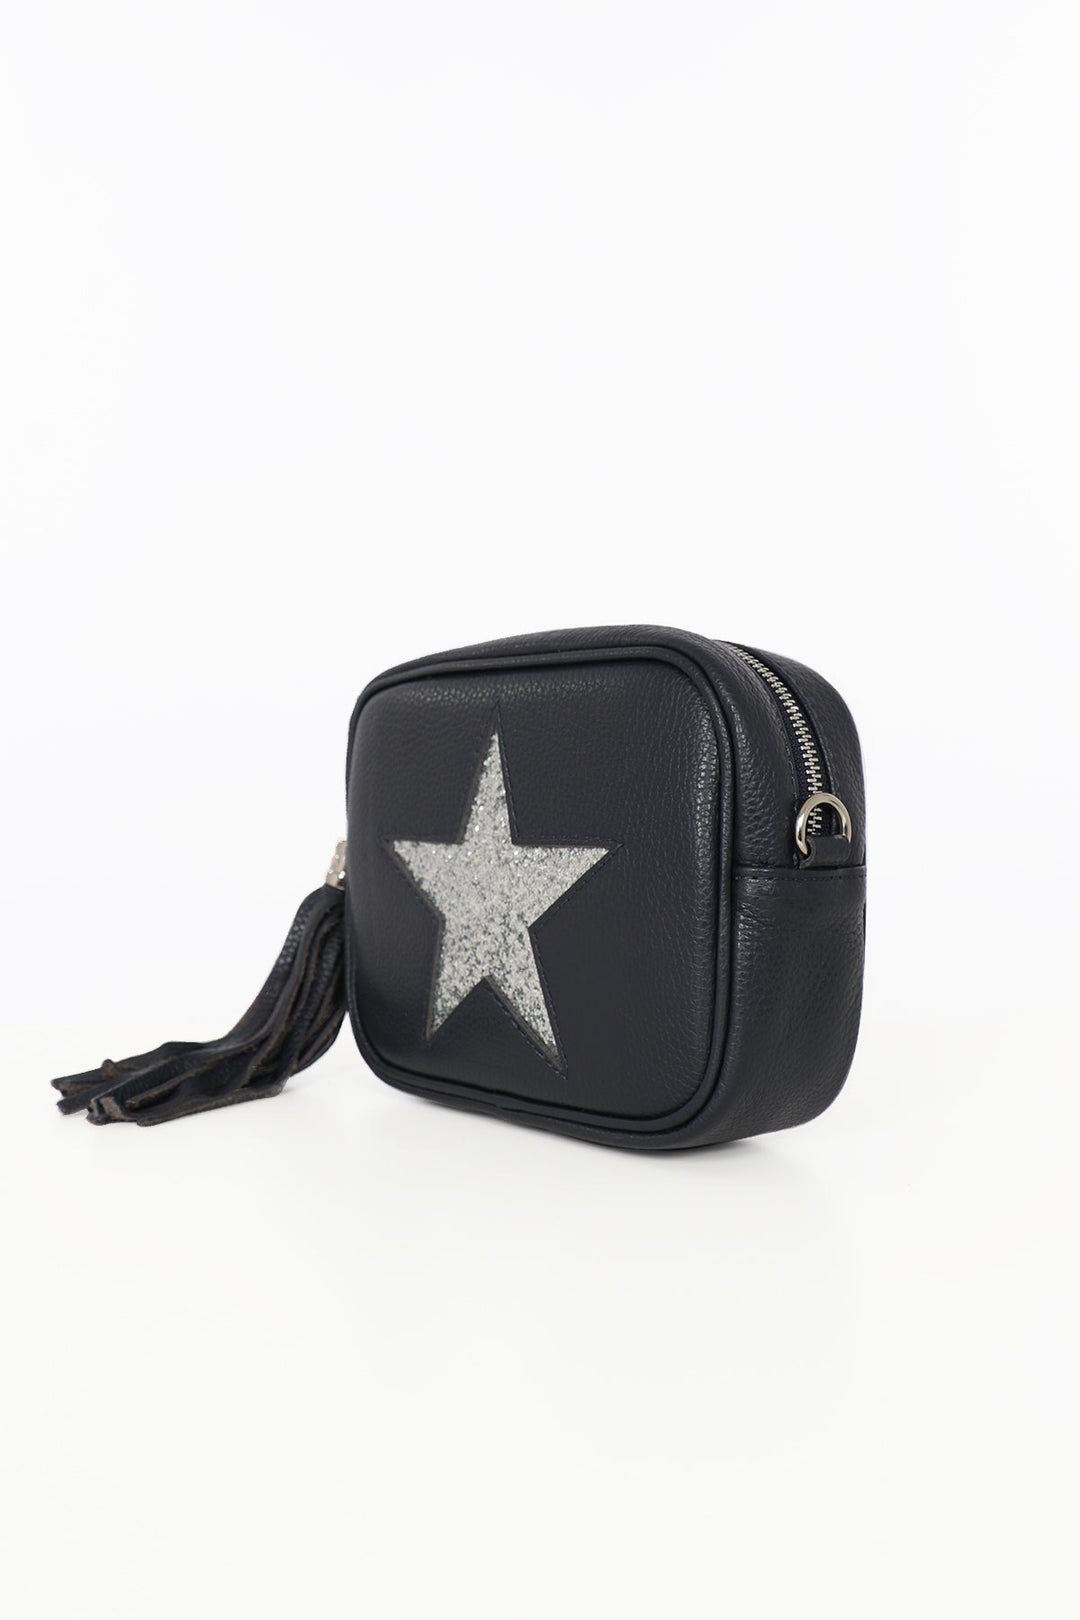 Navy Blue Sliver Glitter Genuine Italian Leather Star Detail Camera Bag With Silver Hardware